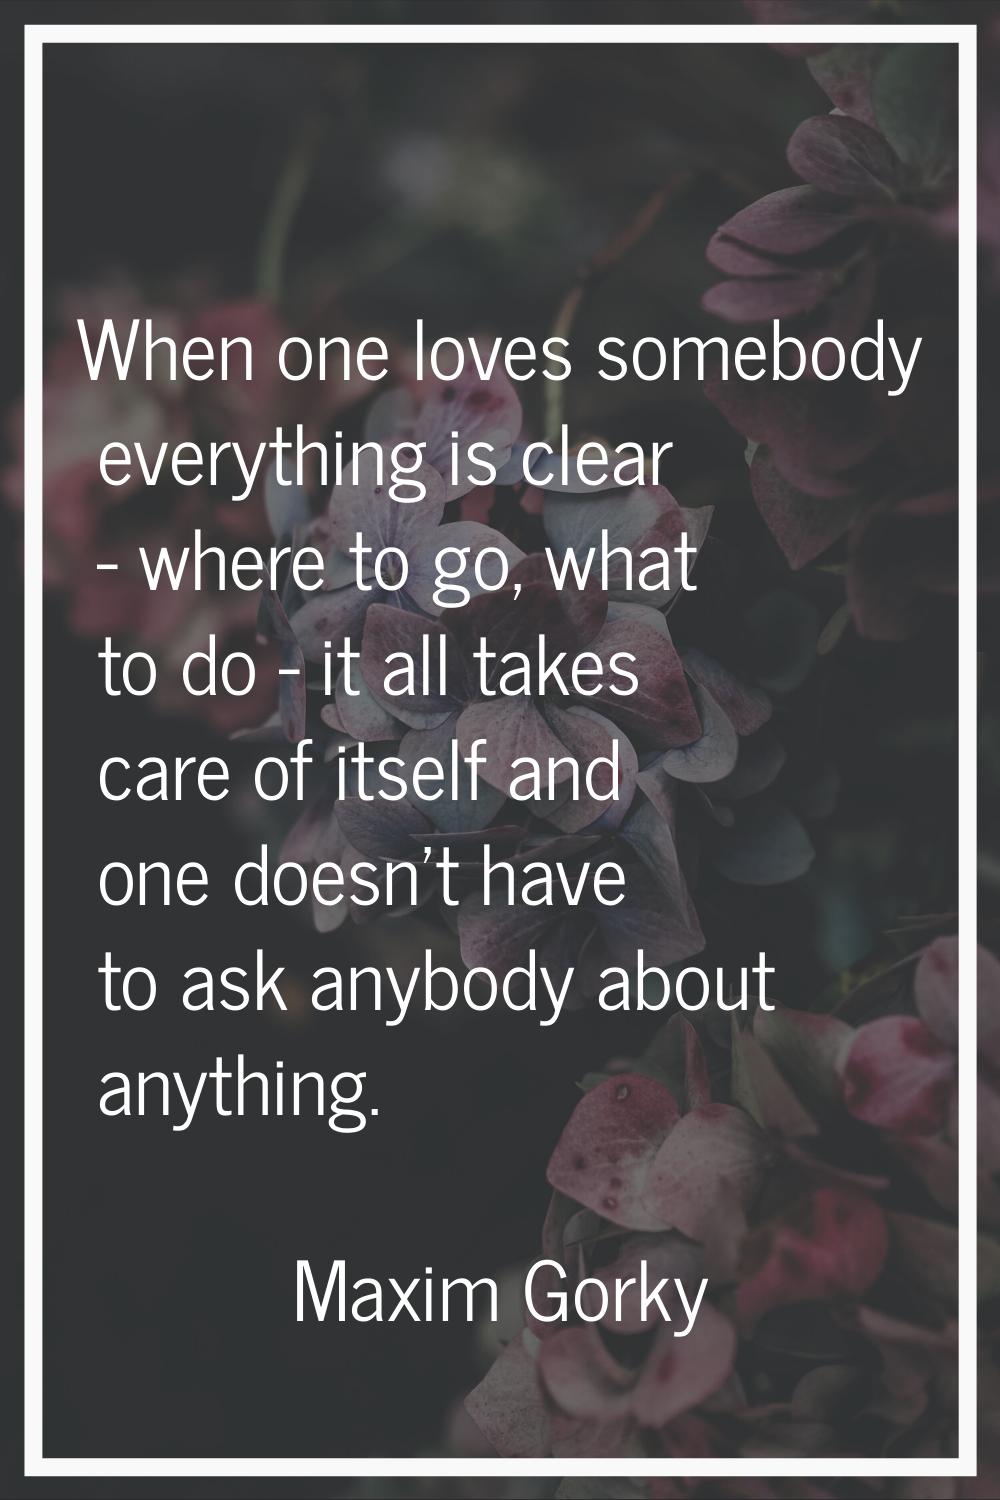 When one loves somebody everything is clear - where to go, what to do - it all takes care of itself